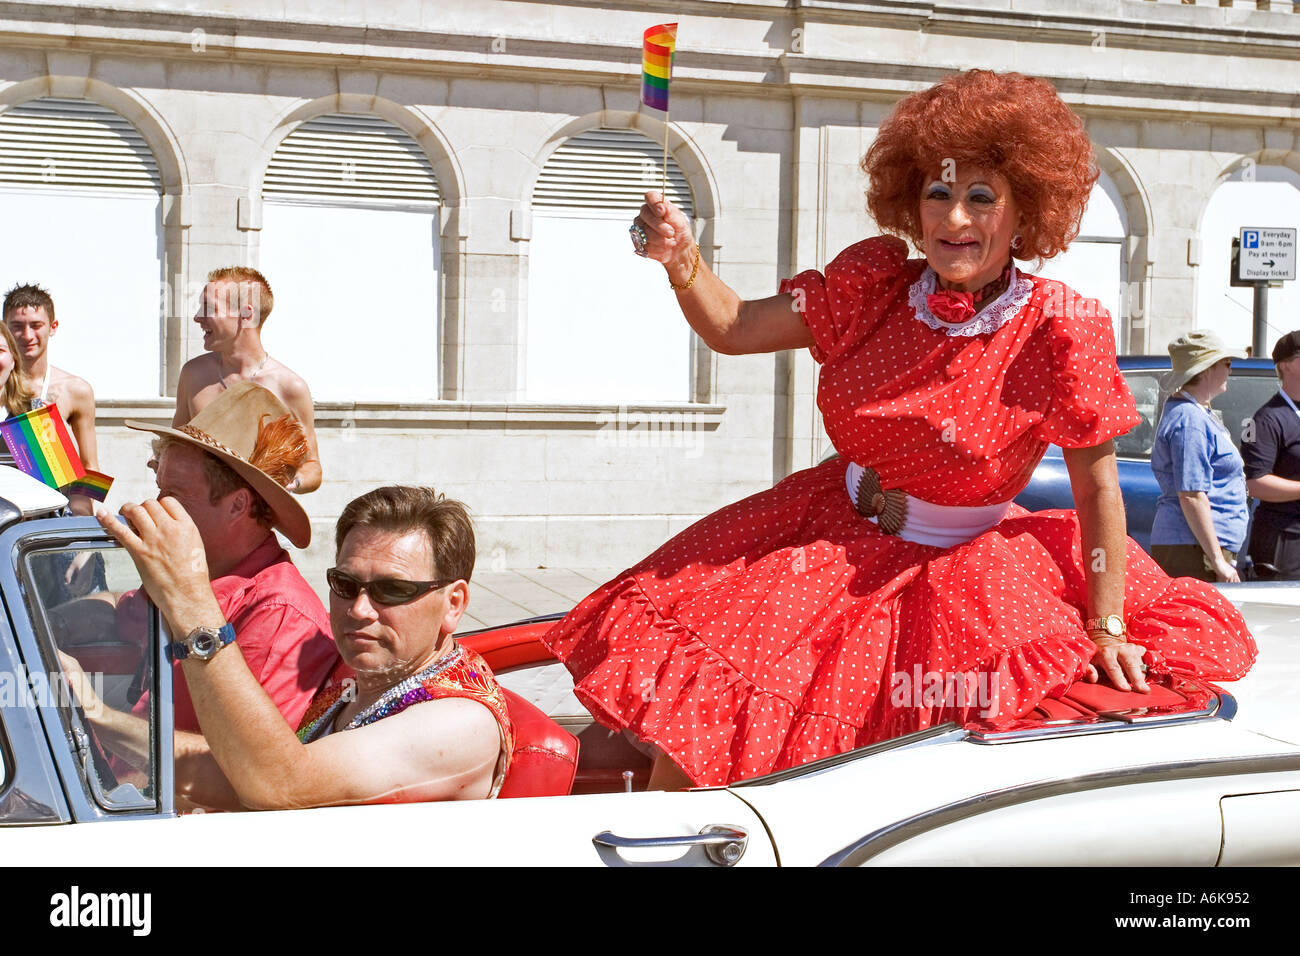 dressed-up-in-bright-red-dress-being-driven-through-parade-gay-pride-A6K952.jpg